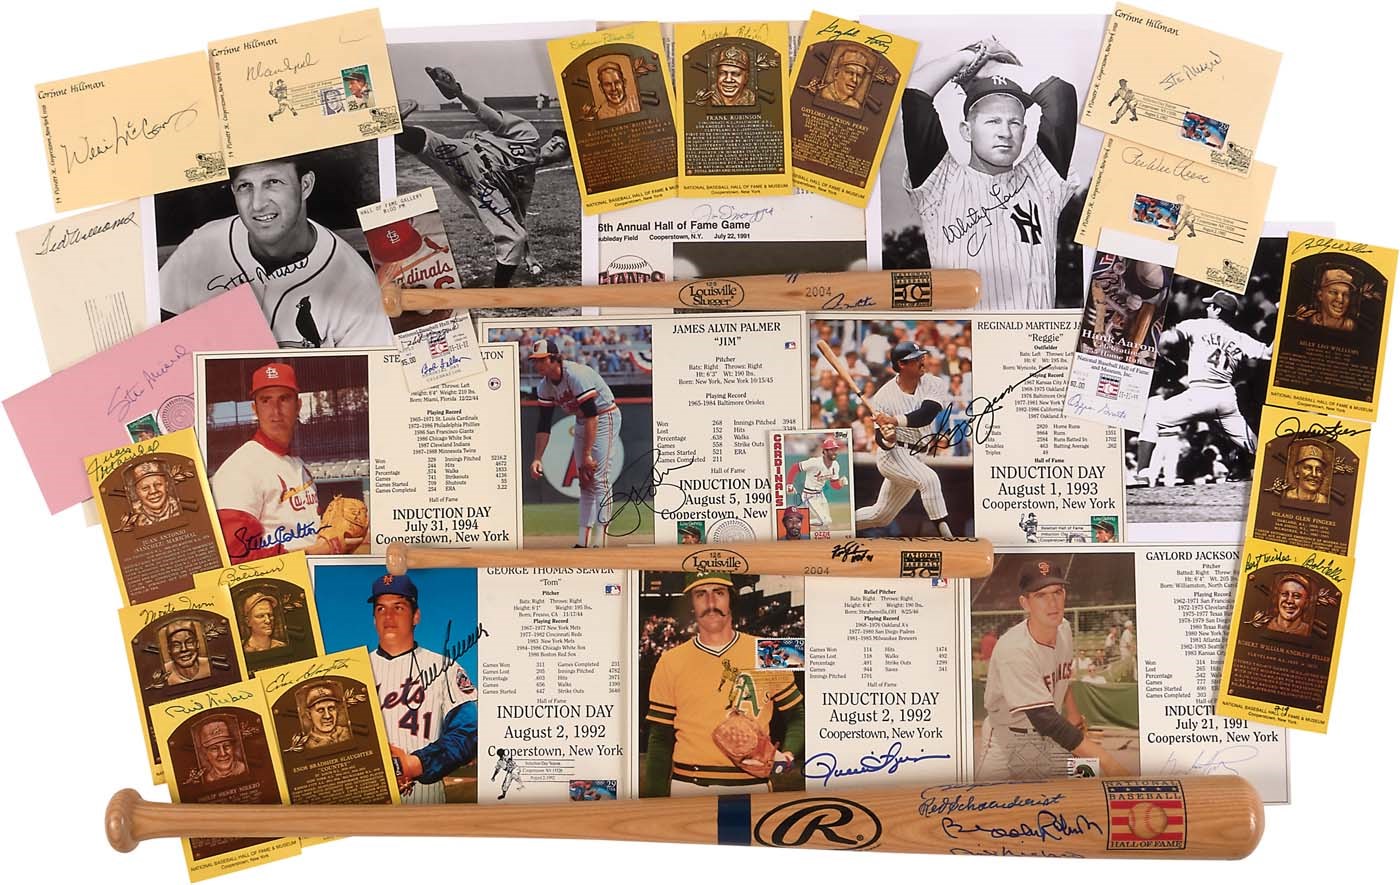 Baseball Autographs - HOF Autograph Collection from Former Cooperstown Employee w/Williams & DiMaggio and Photo Documentation (100+)